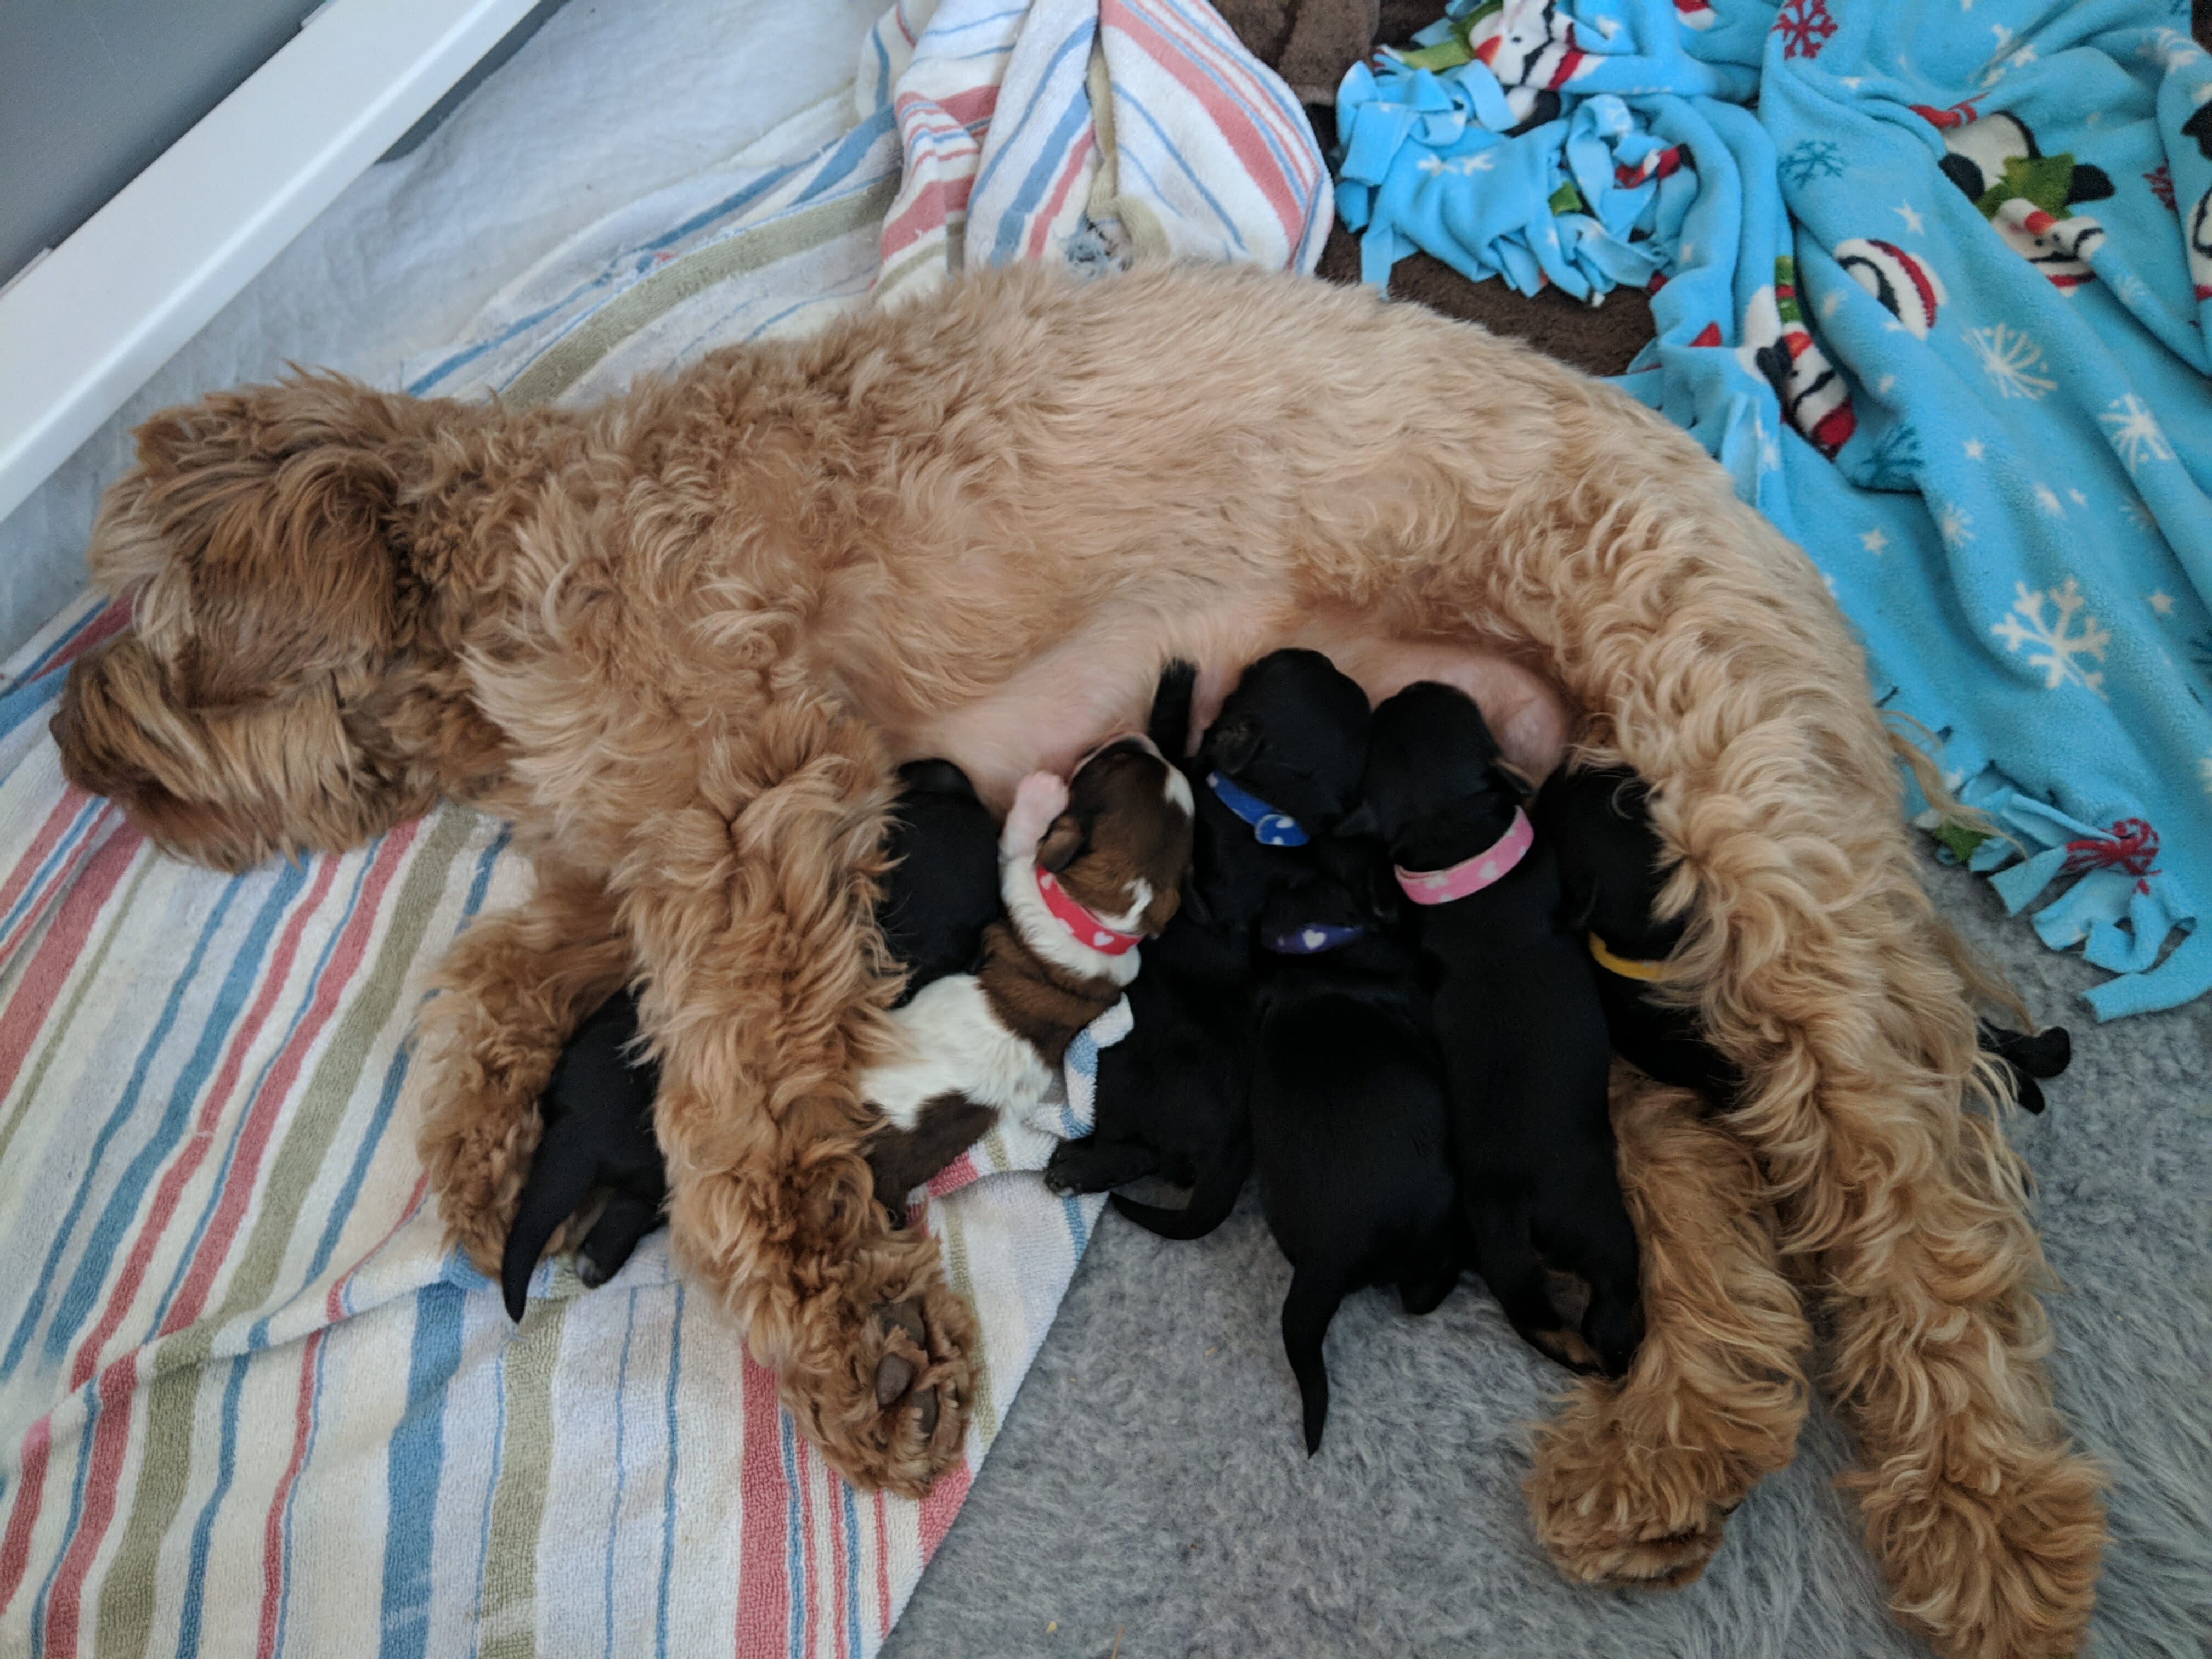 New labradoodle mom Pippa and her puppies nursing